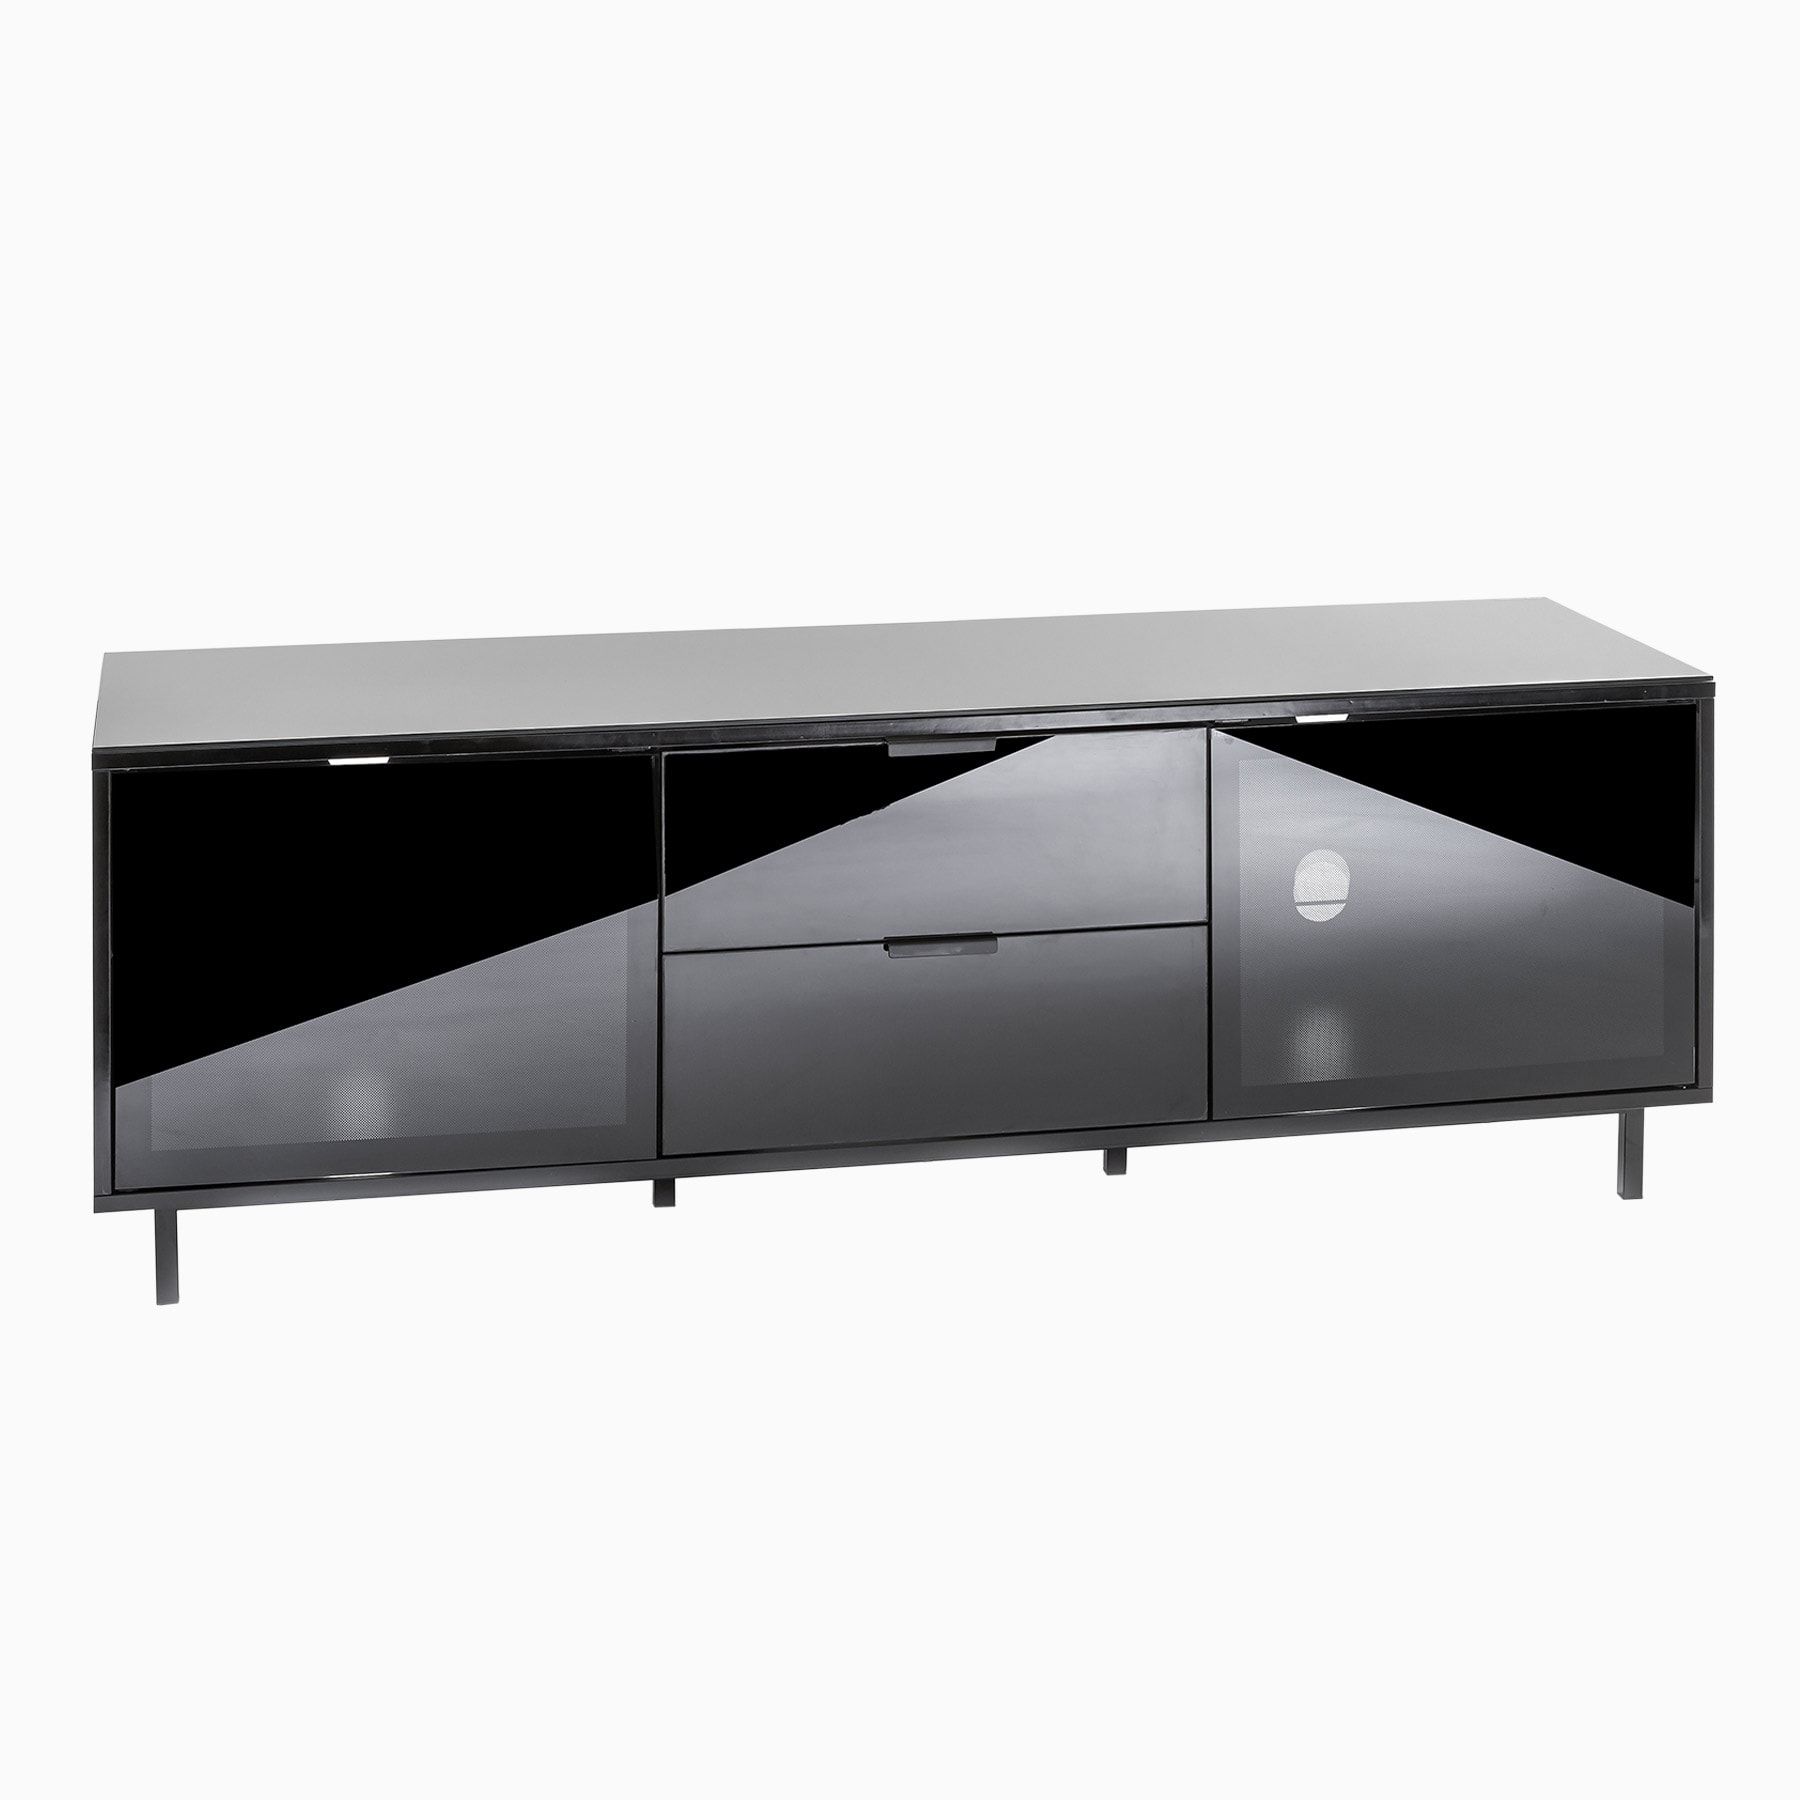 Black Gloss Tv Unit Up To 65 Inch Flat Tv | Setvc 1500blk Within Black Gloss Tv Units (View 10 of 15)